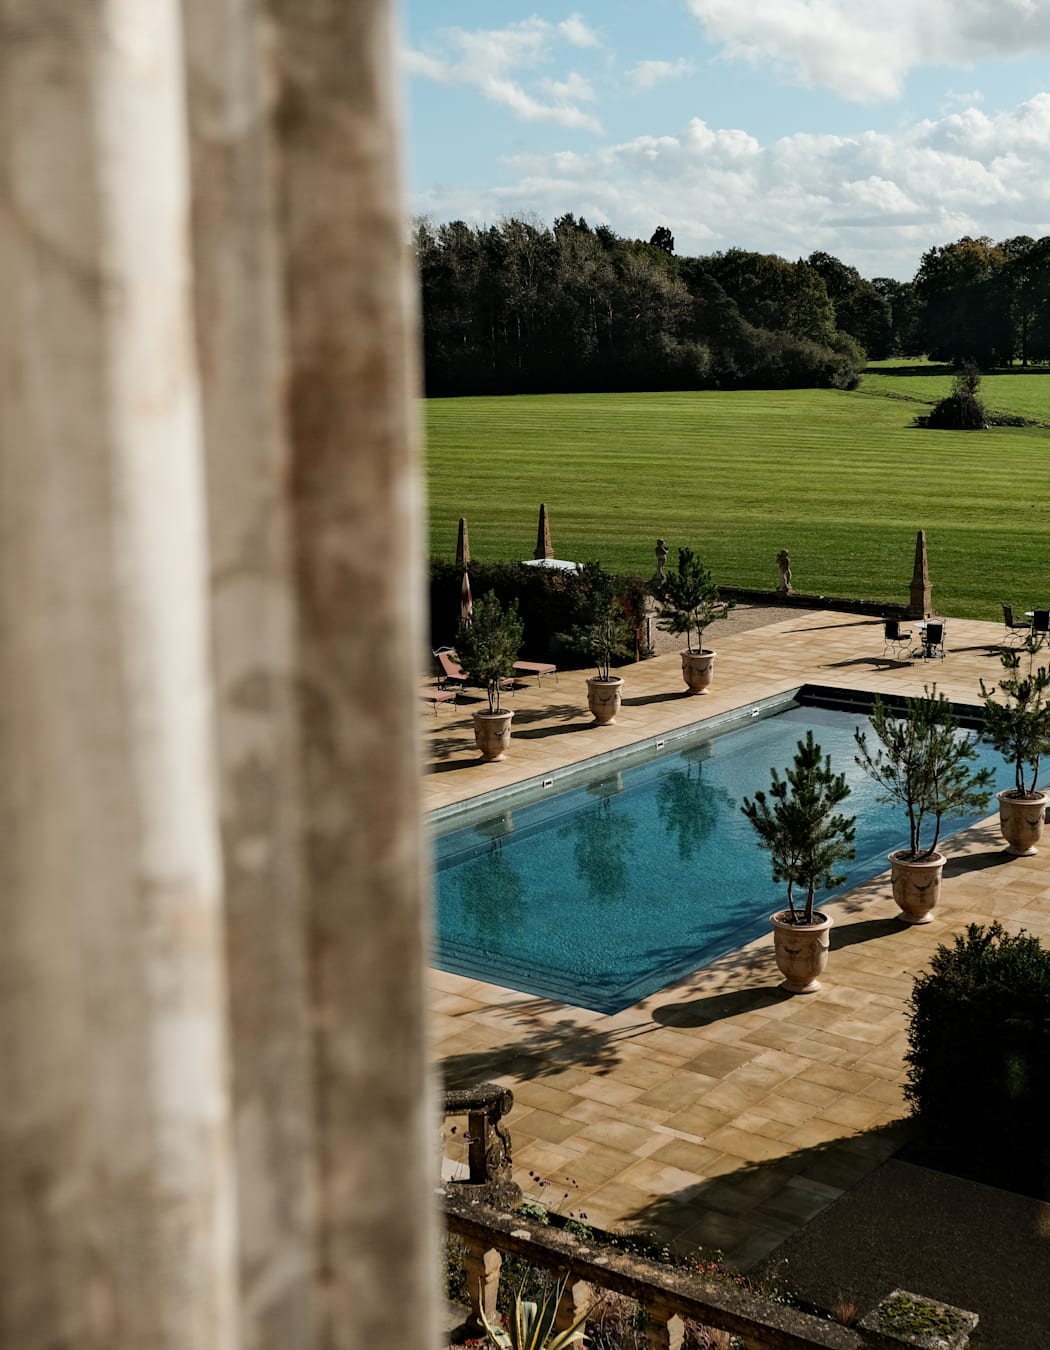 A view through a window of a large swimming pool in beautiful country estate